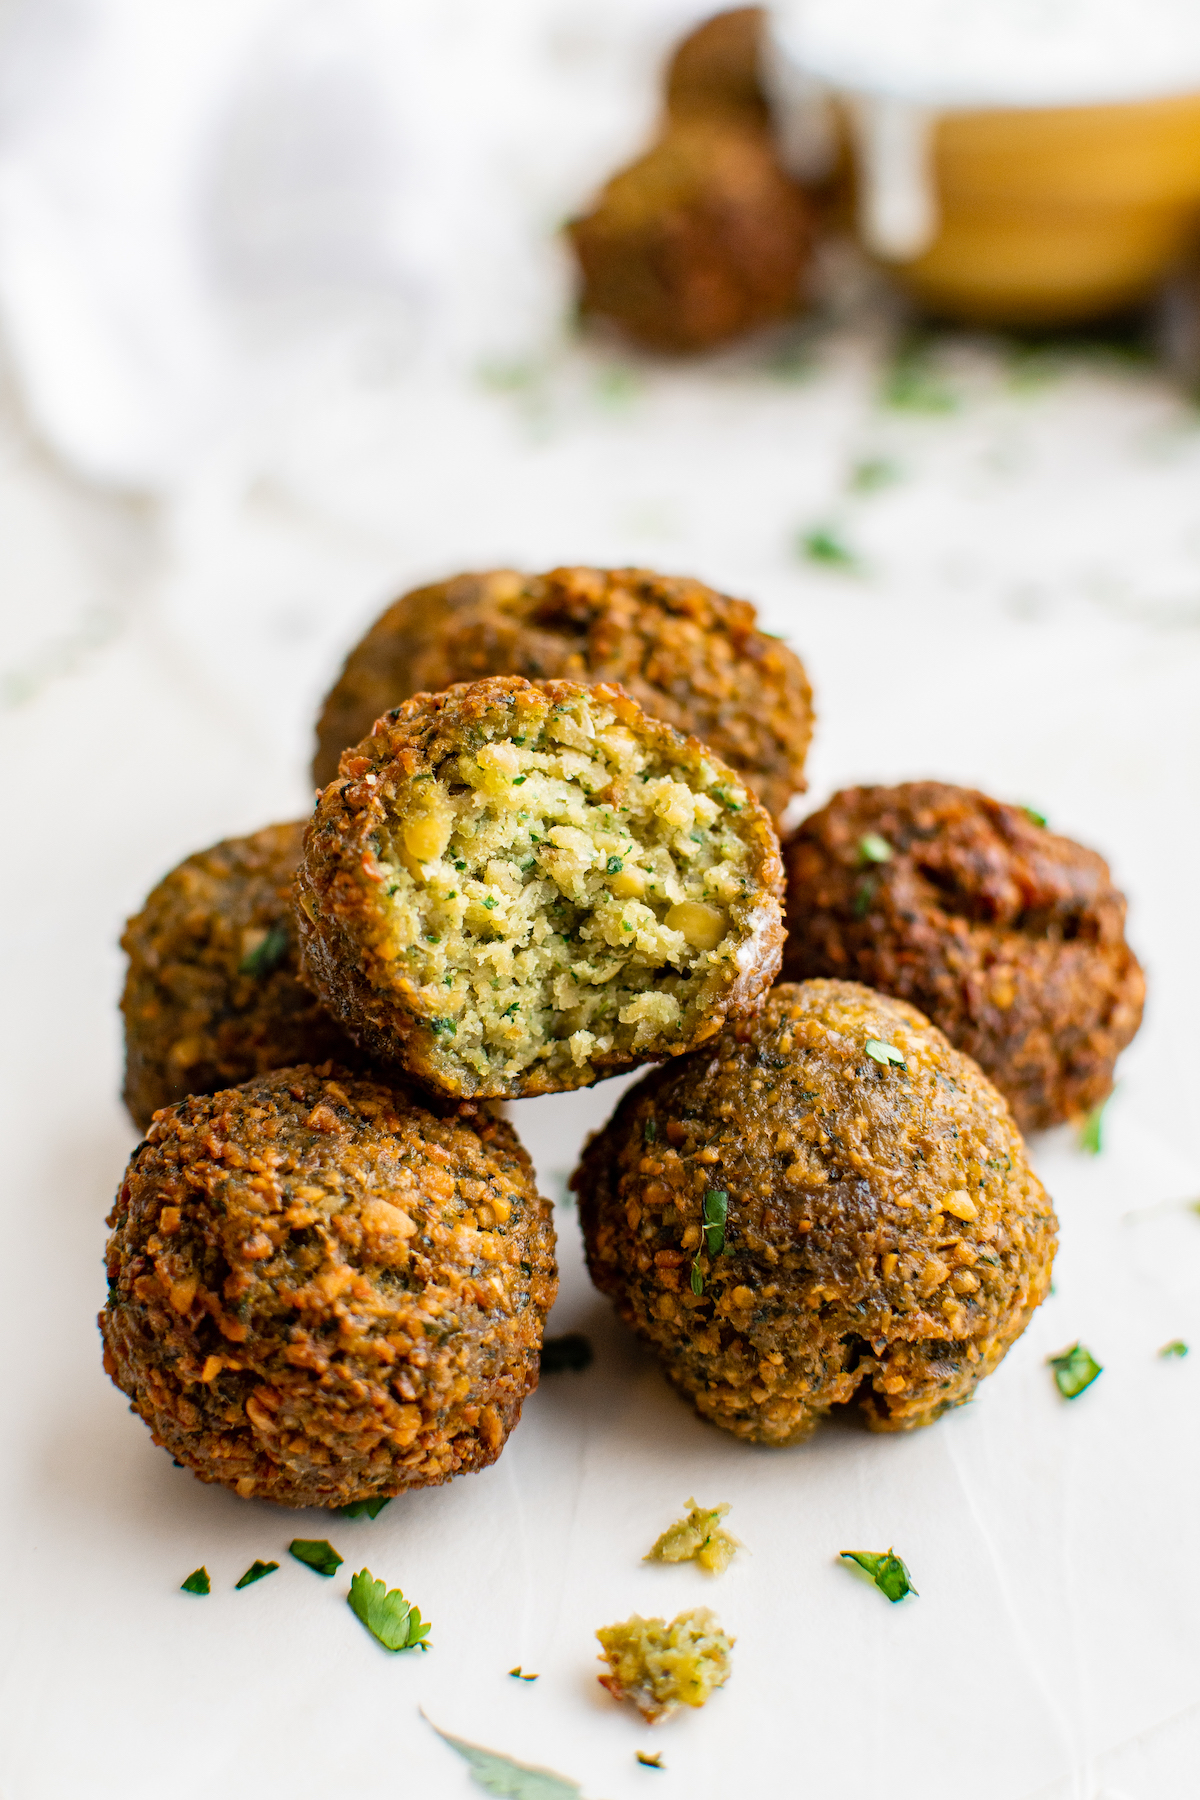 Falafel ball in a pile with a bite taken out of it.